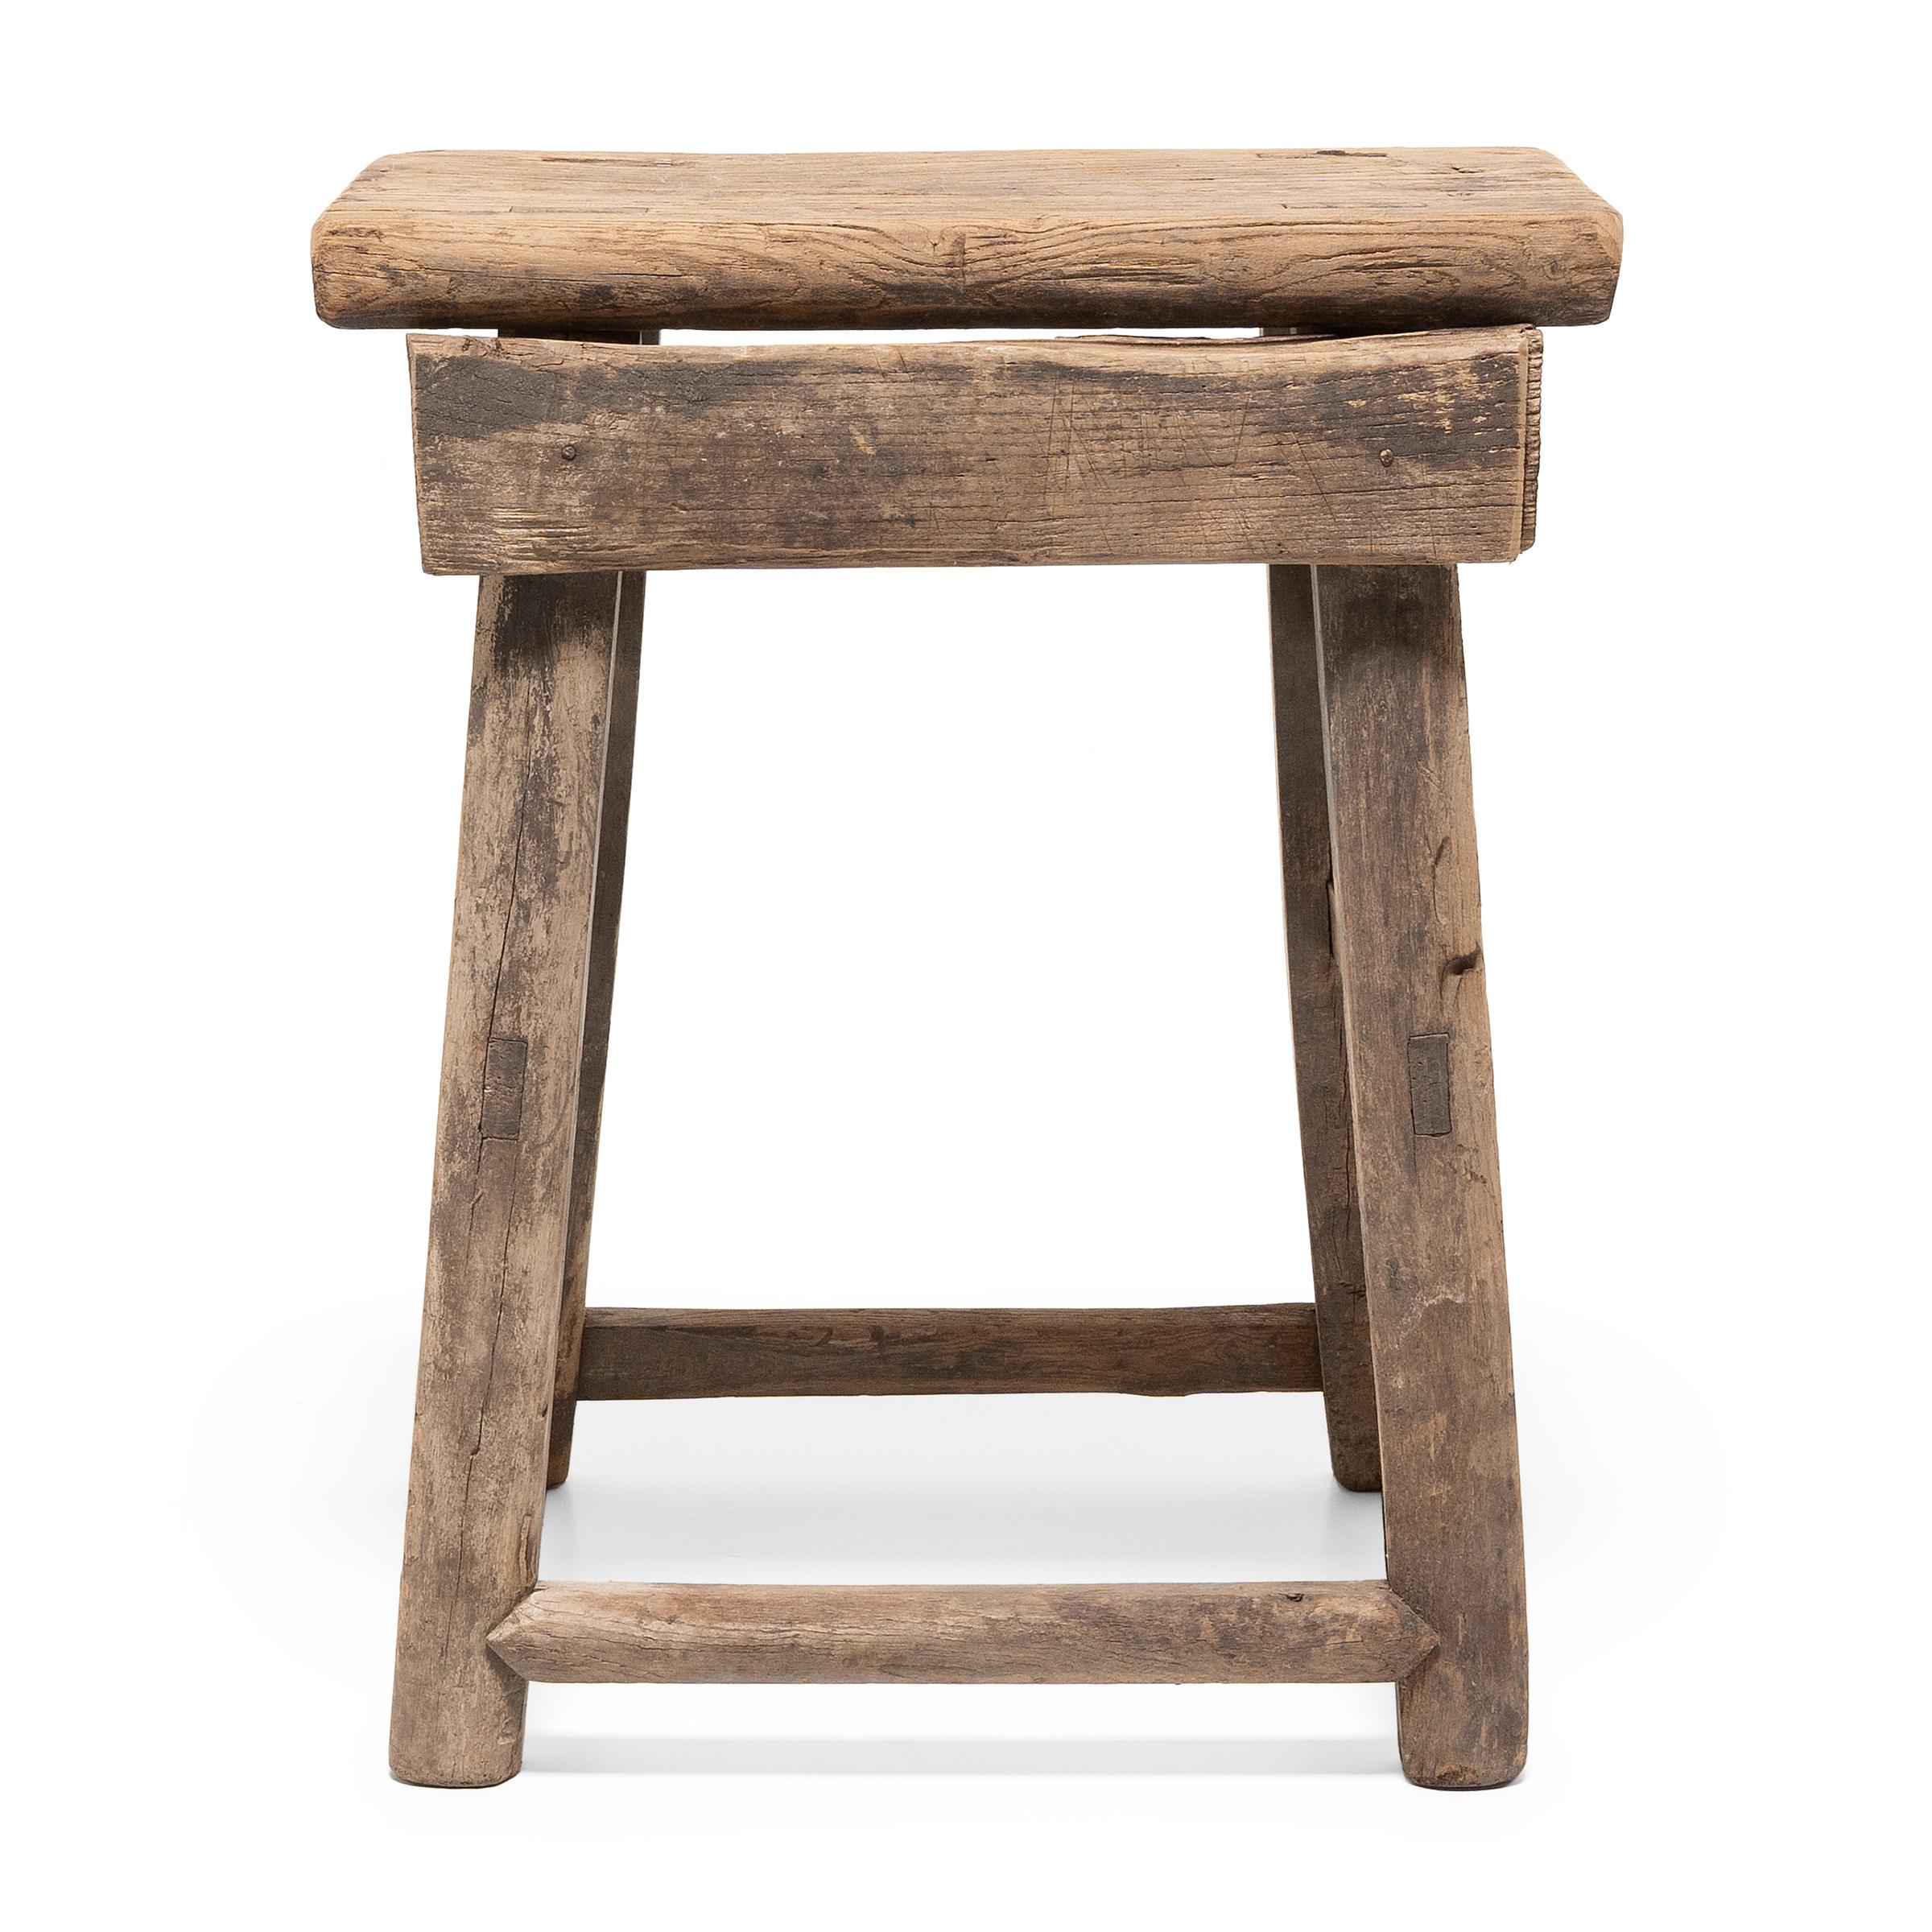 Dated to the turn of the century, this provincial stool would have been used throughout a courtyard home as versatile everyday seating. Hand-crafted of pine, the tapered stool has a rectangular seat supported by four splayed legs, each linked with